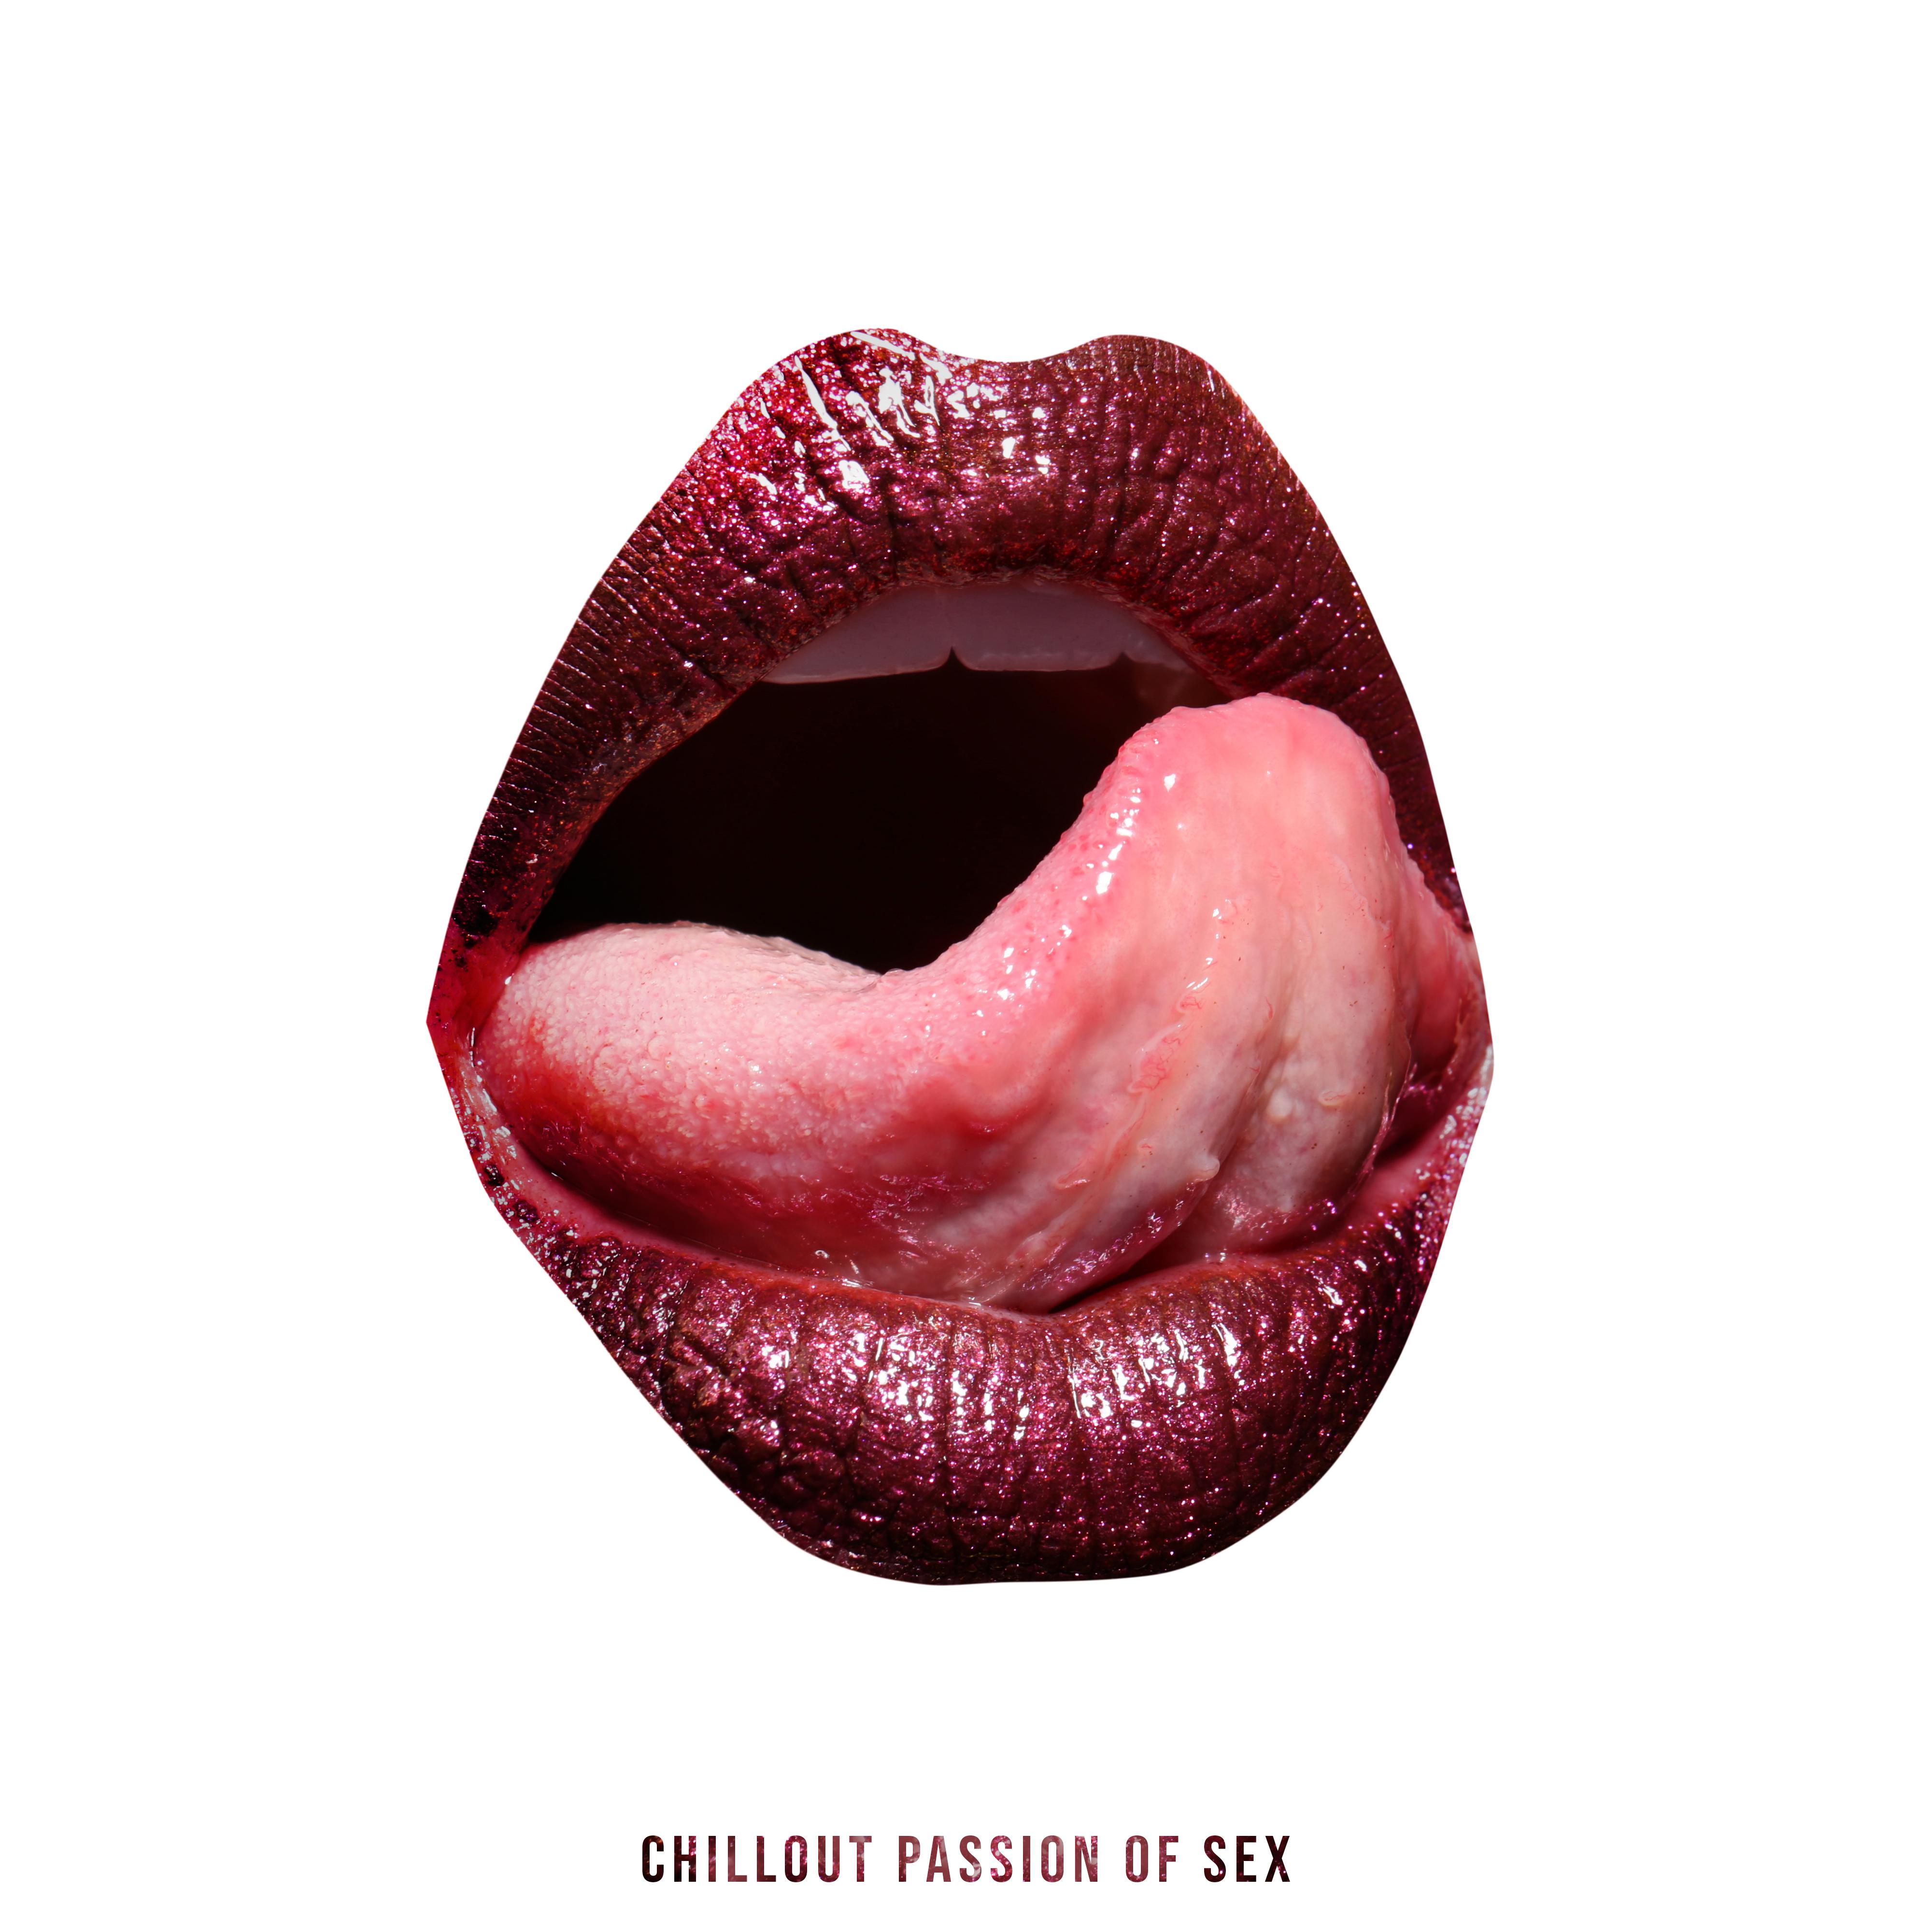 Chillout Passion of ***: Best 2019 Stimulating Chill Out Beats, Music for Lovers, Wild Wet Evening Full of *** & Love